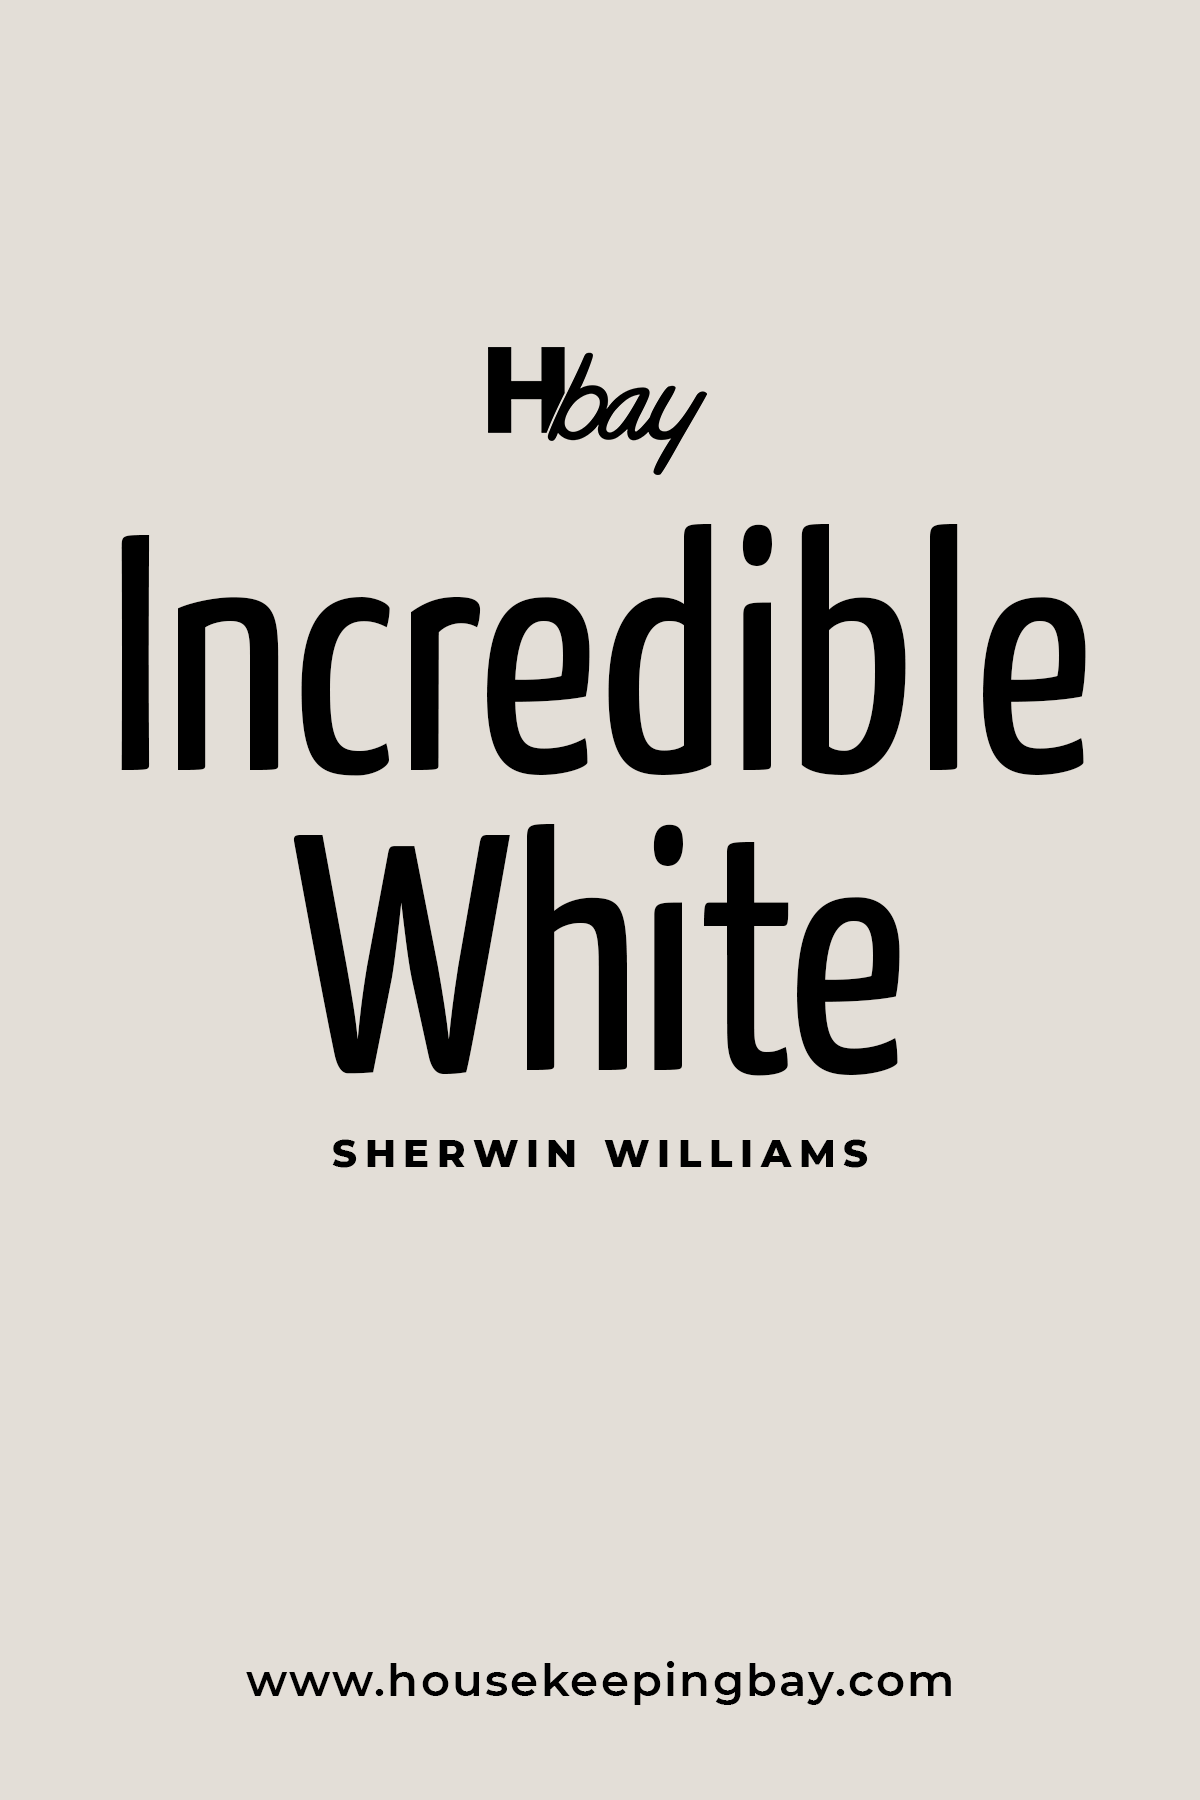 Incredible White by Sherwin Williams